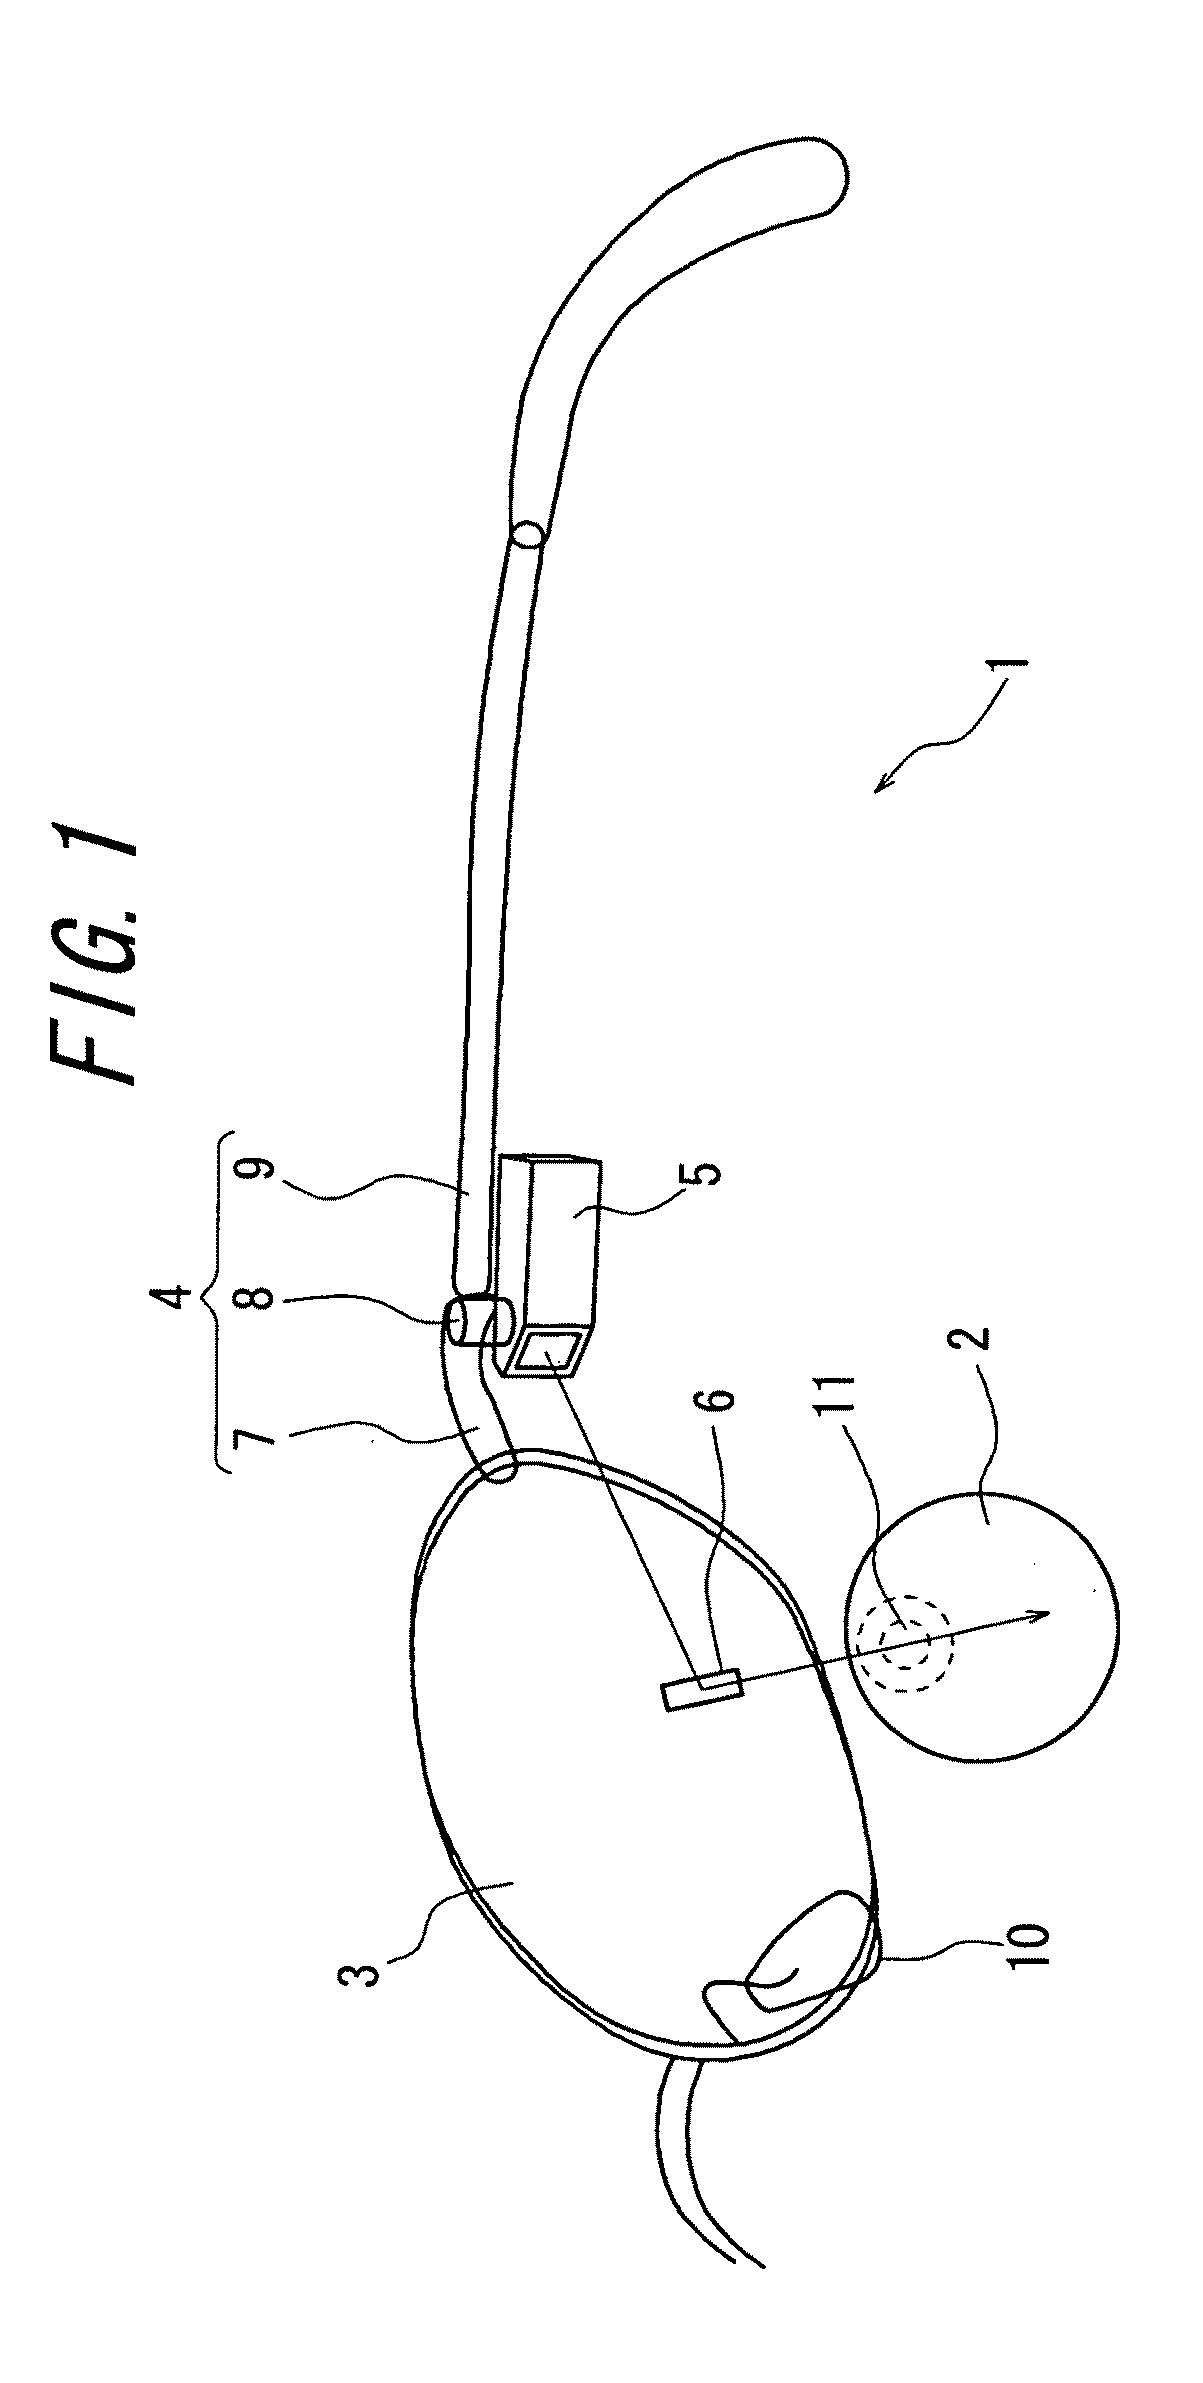 Spectacles-type image display device